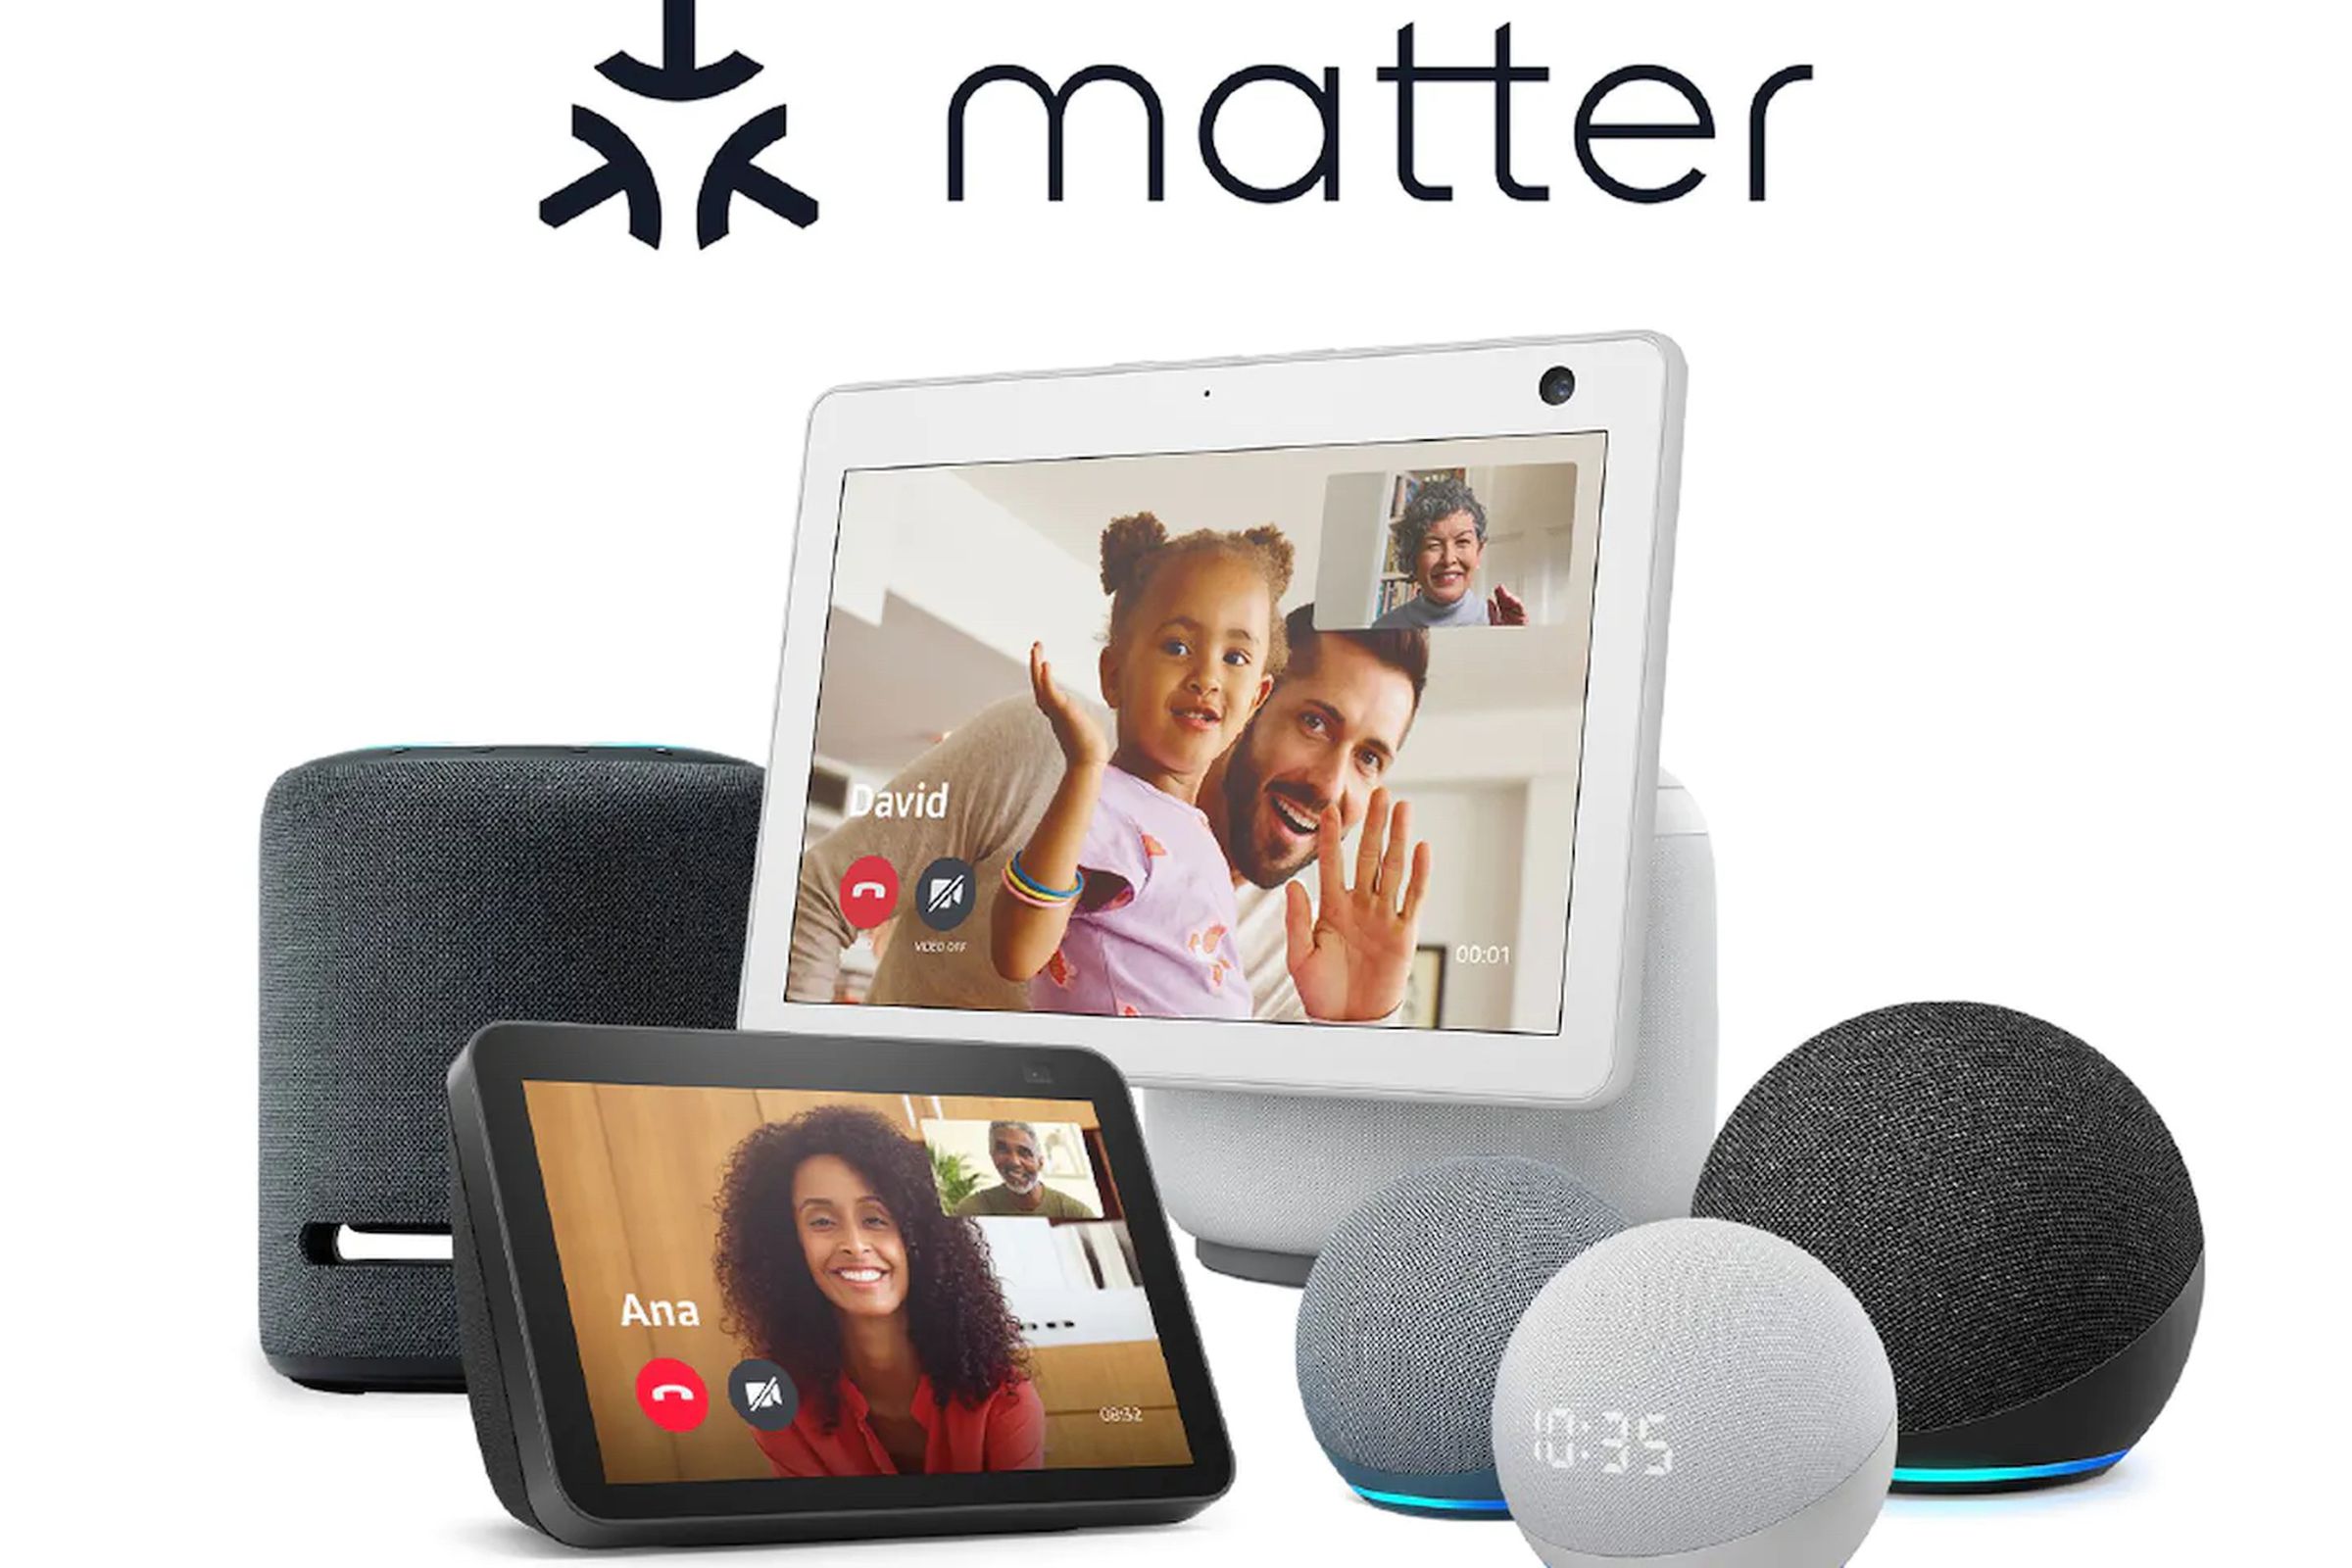 Seventeen Echo smart speakers and displays are getting upgraded to be Matter-over-Wi-Fi controllers in December. 